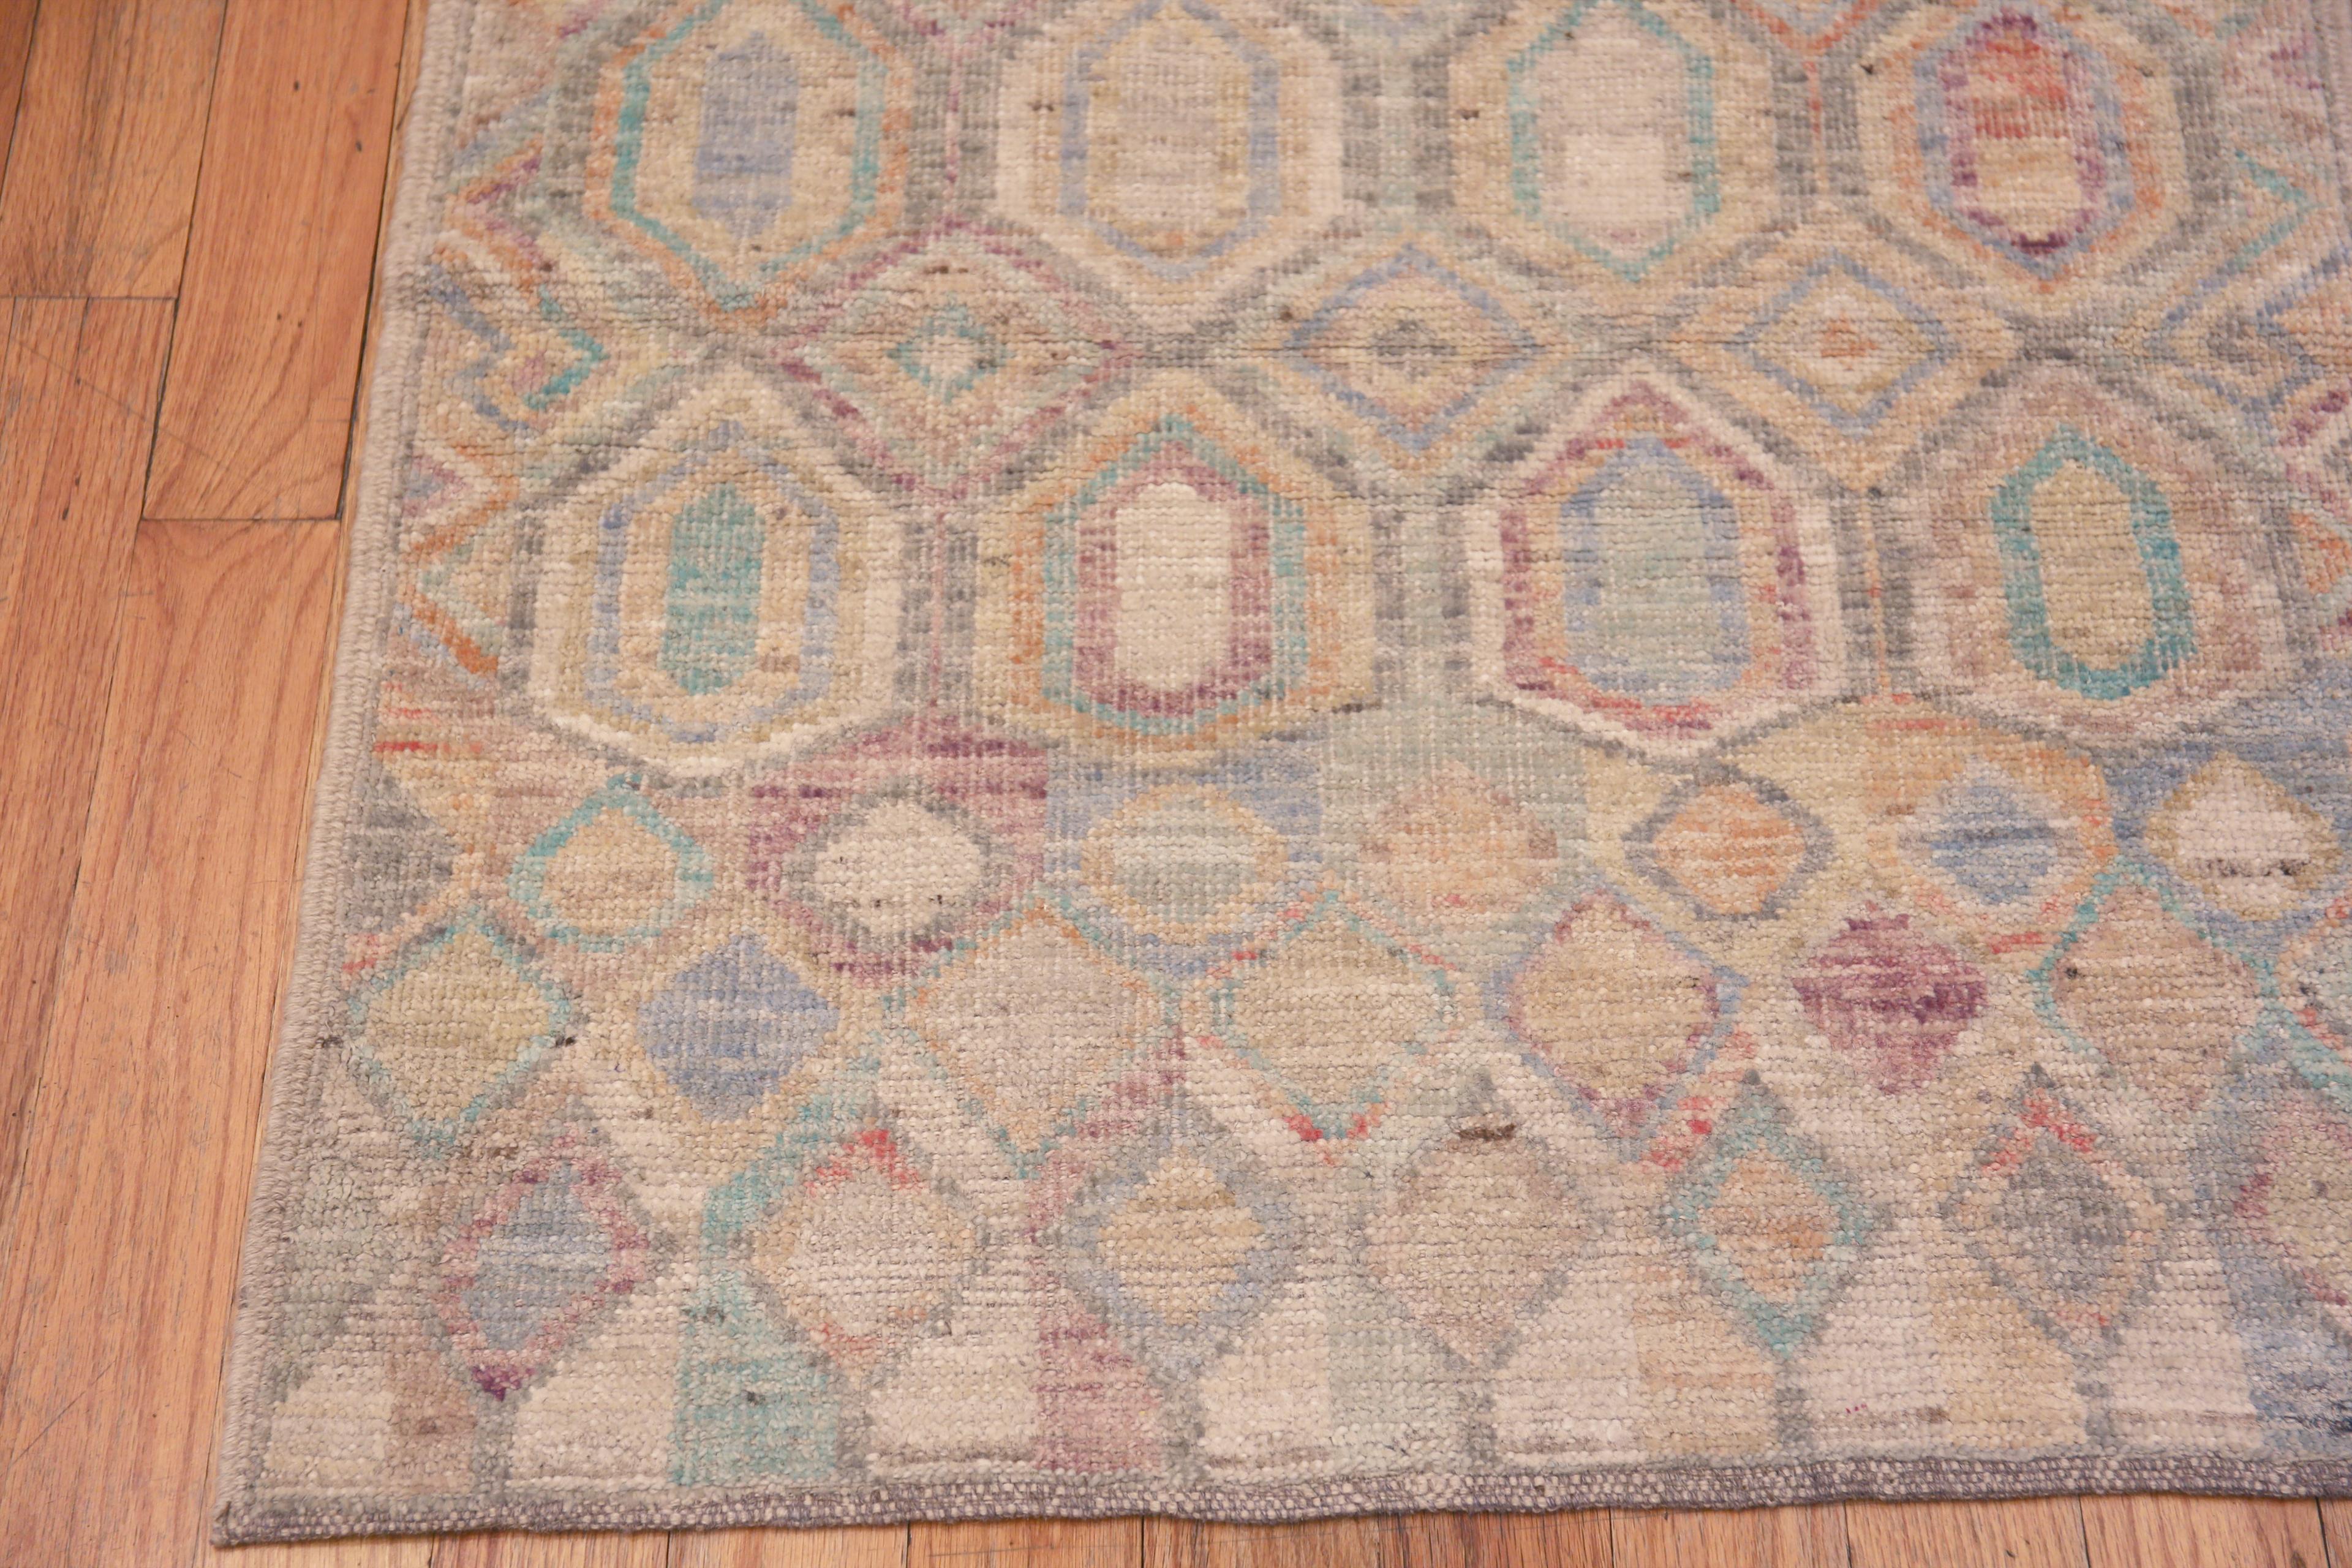 Hand-Knotted Nazmiyal Collection Tribal Geometric Diamond Rustic Runner Rug 2'10